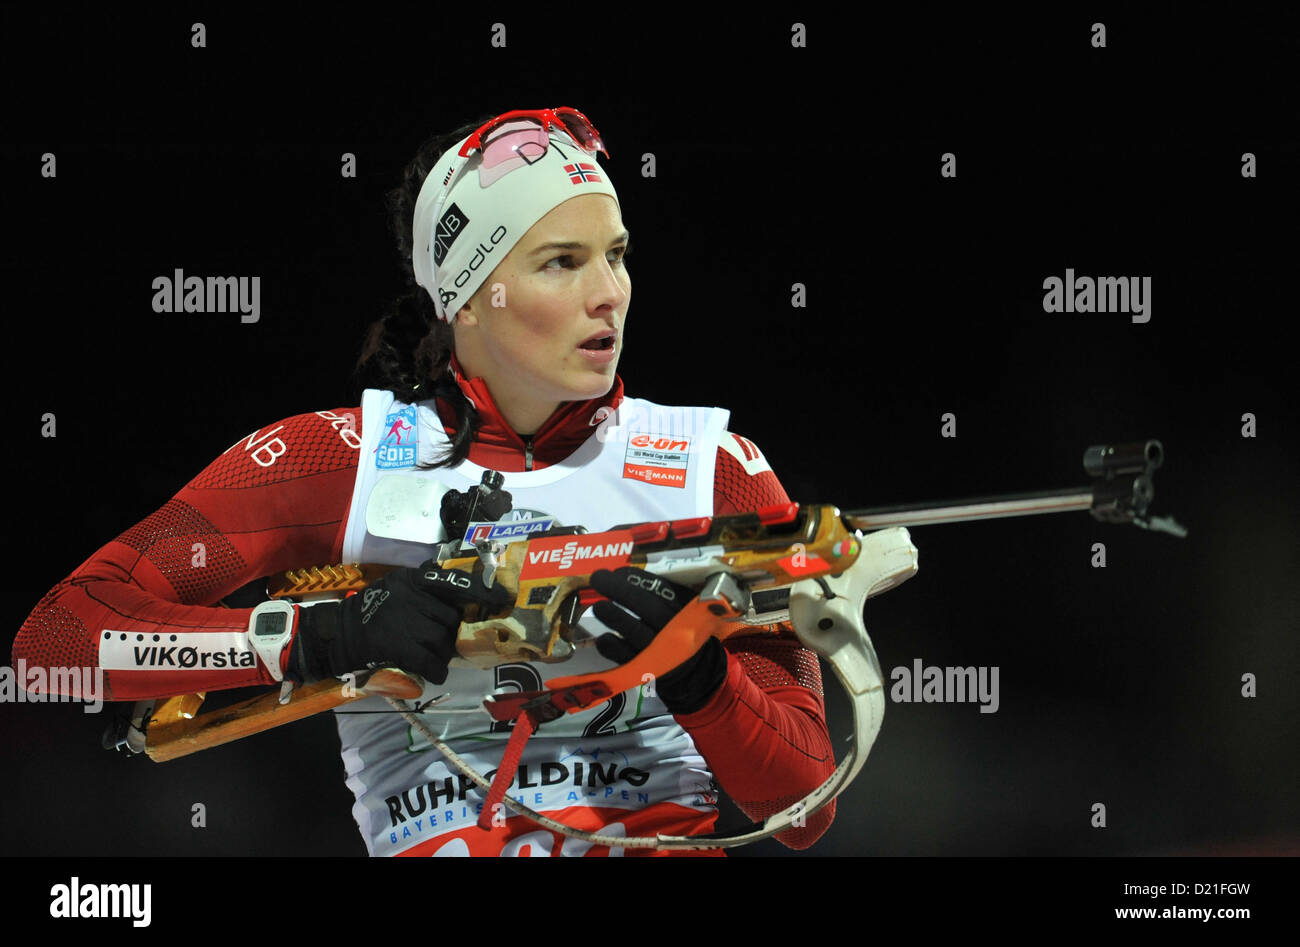 Norwegian biathlete Ann Kristin Aafedt Flatland stands at the shooting range during the women's relay event at the biathlon world cup at Chiemgau Arena in Ruhpolding, Germany, 09 January 2013. Norway won the relay. Photo: ANDREAS GEBERT Stock Photo